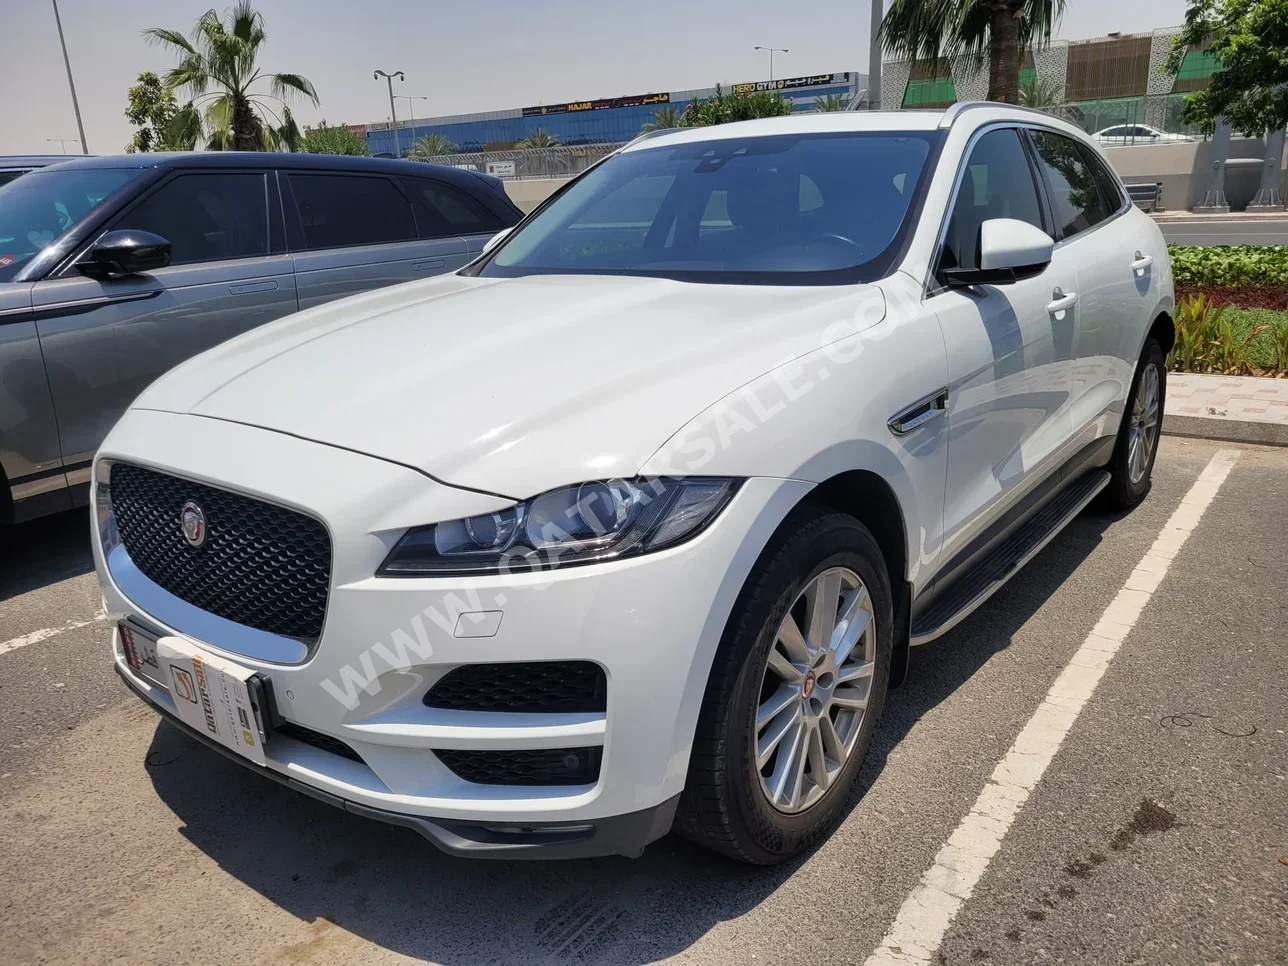 Jaguar  F-Pace  2018  Automatic  153,000 Km  6 Cylinder  Four Wheel Drive (4WD)  SUV  White